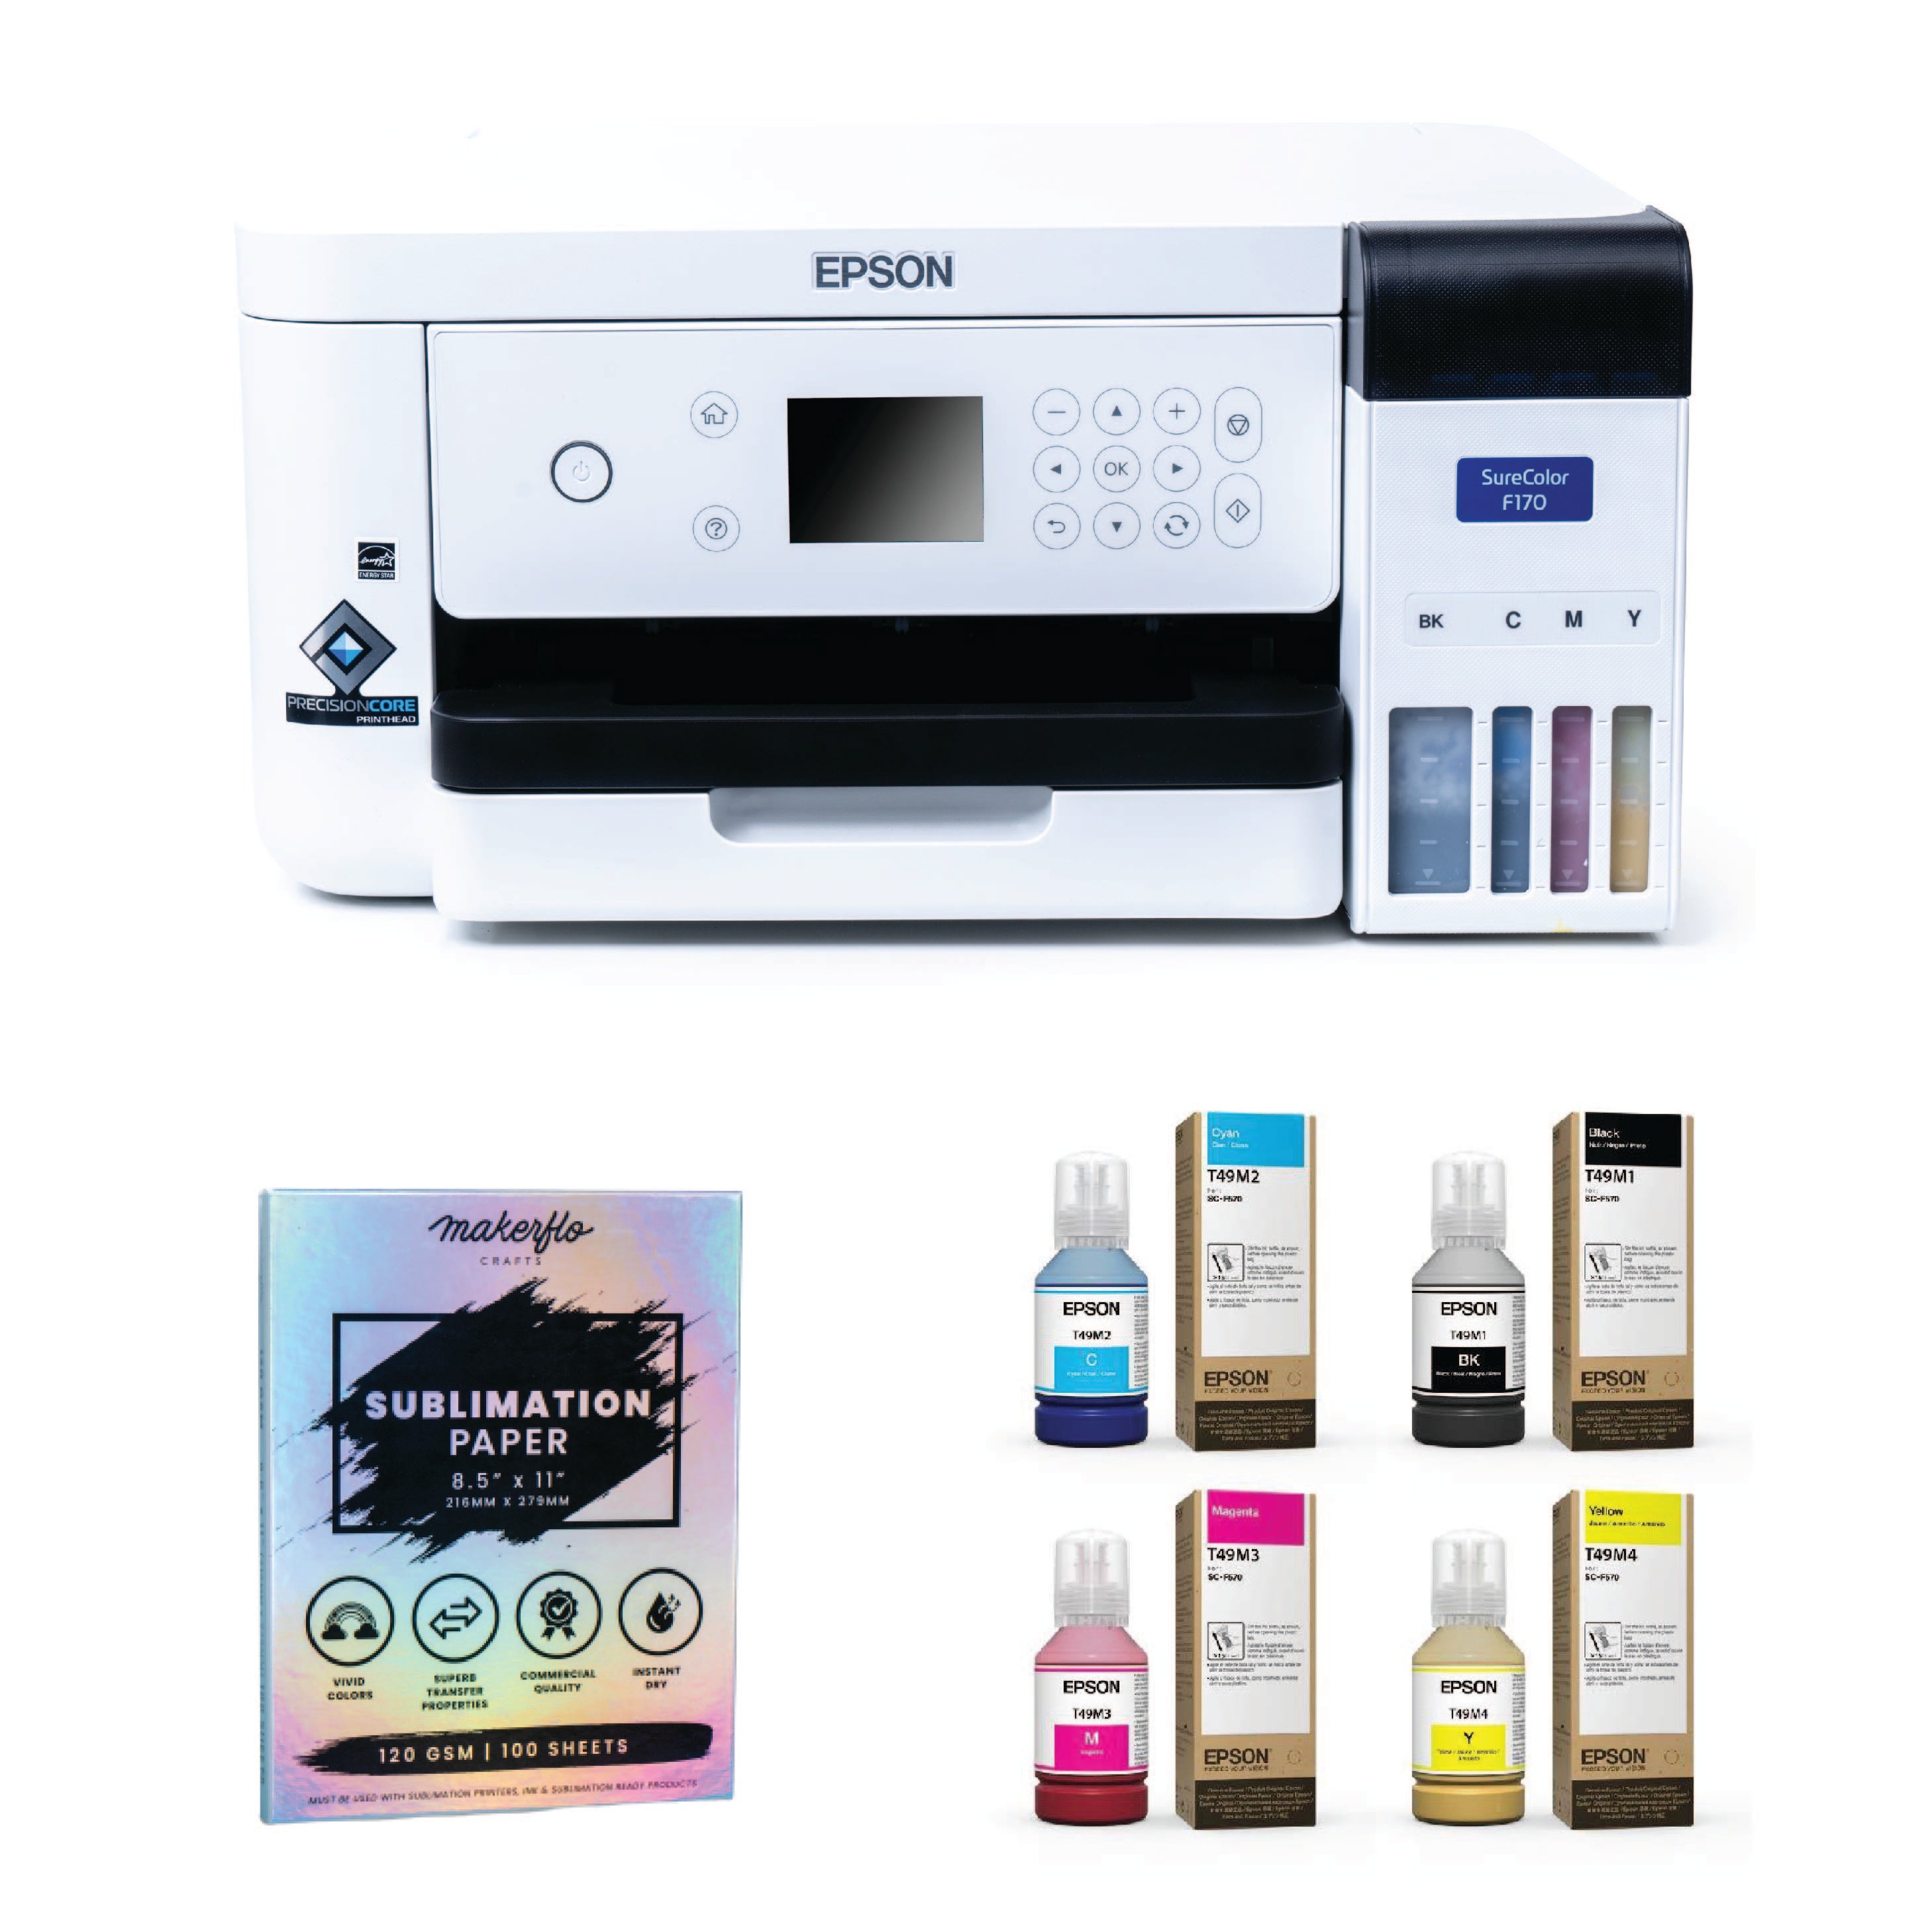 SureColor F170 Dye-Sublimation Printer - Certified ReNew, Products